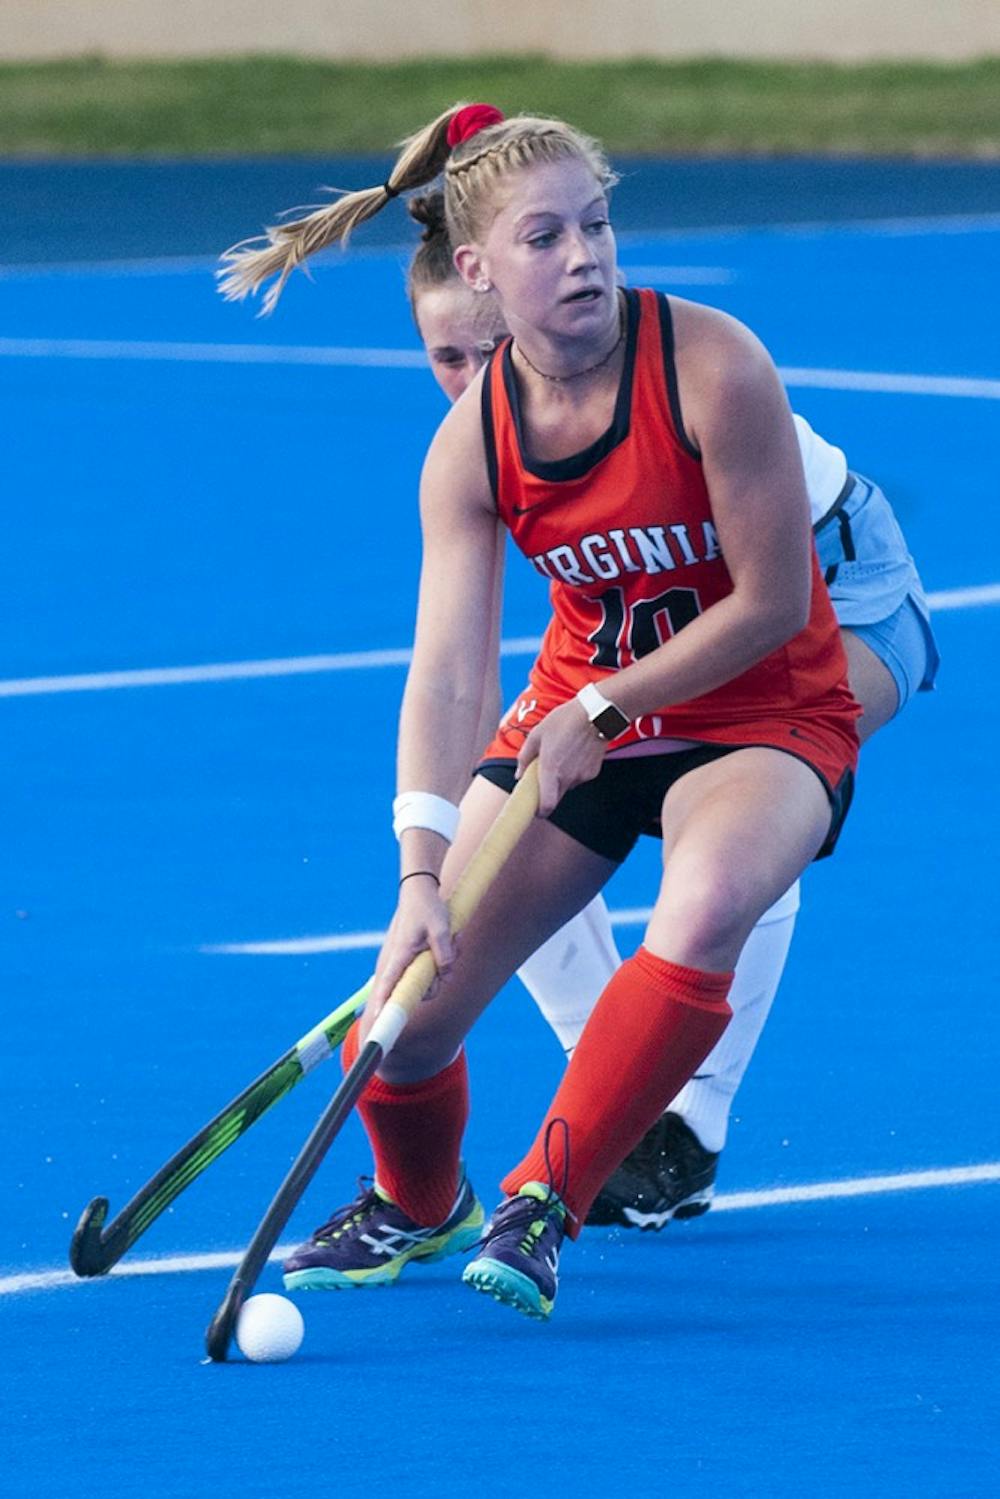 <p>Sophomore midfielder Colleen Norair scored her second goal of the season off the bench against Drexel.</p>